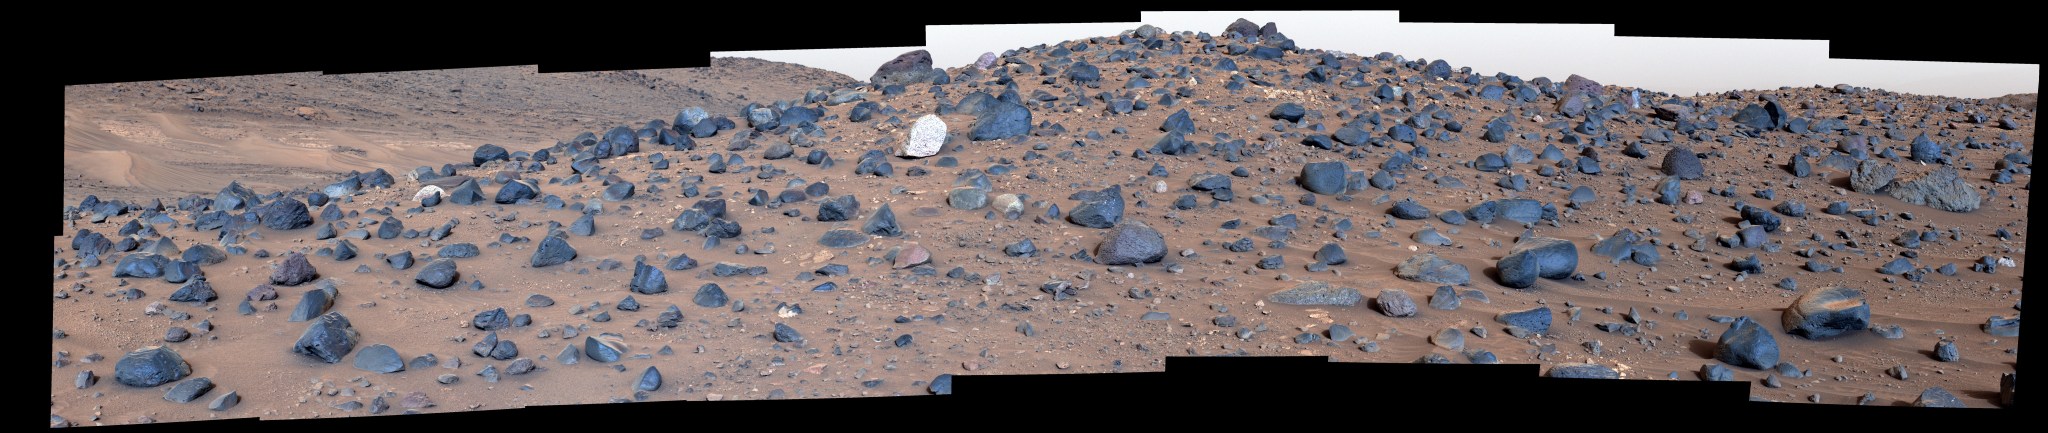 Stitched together from 18 images taken by NASA’s Perseverance rover